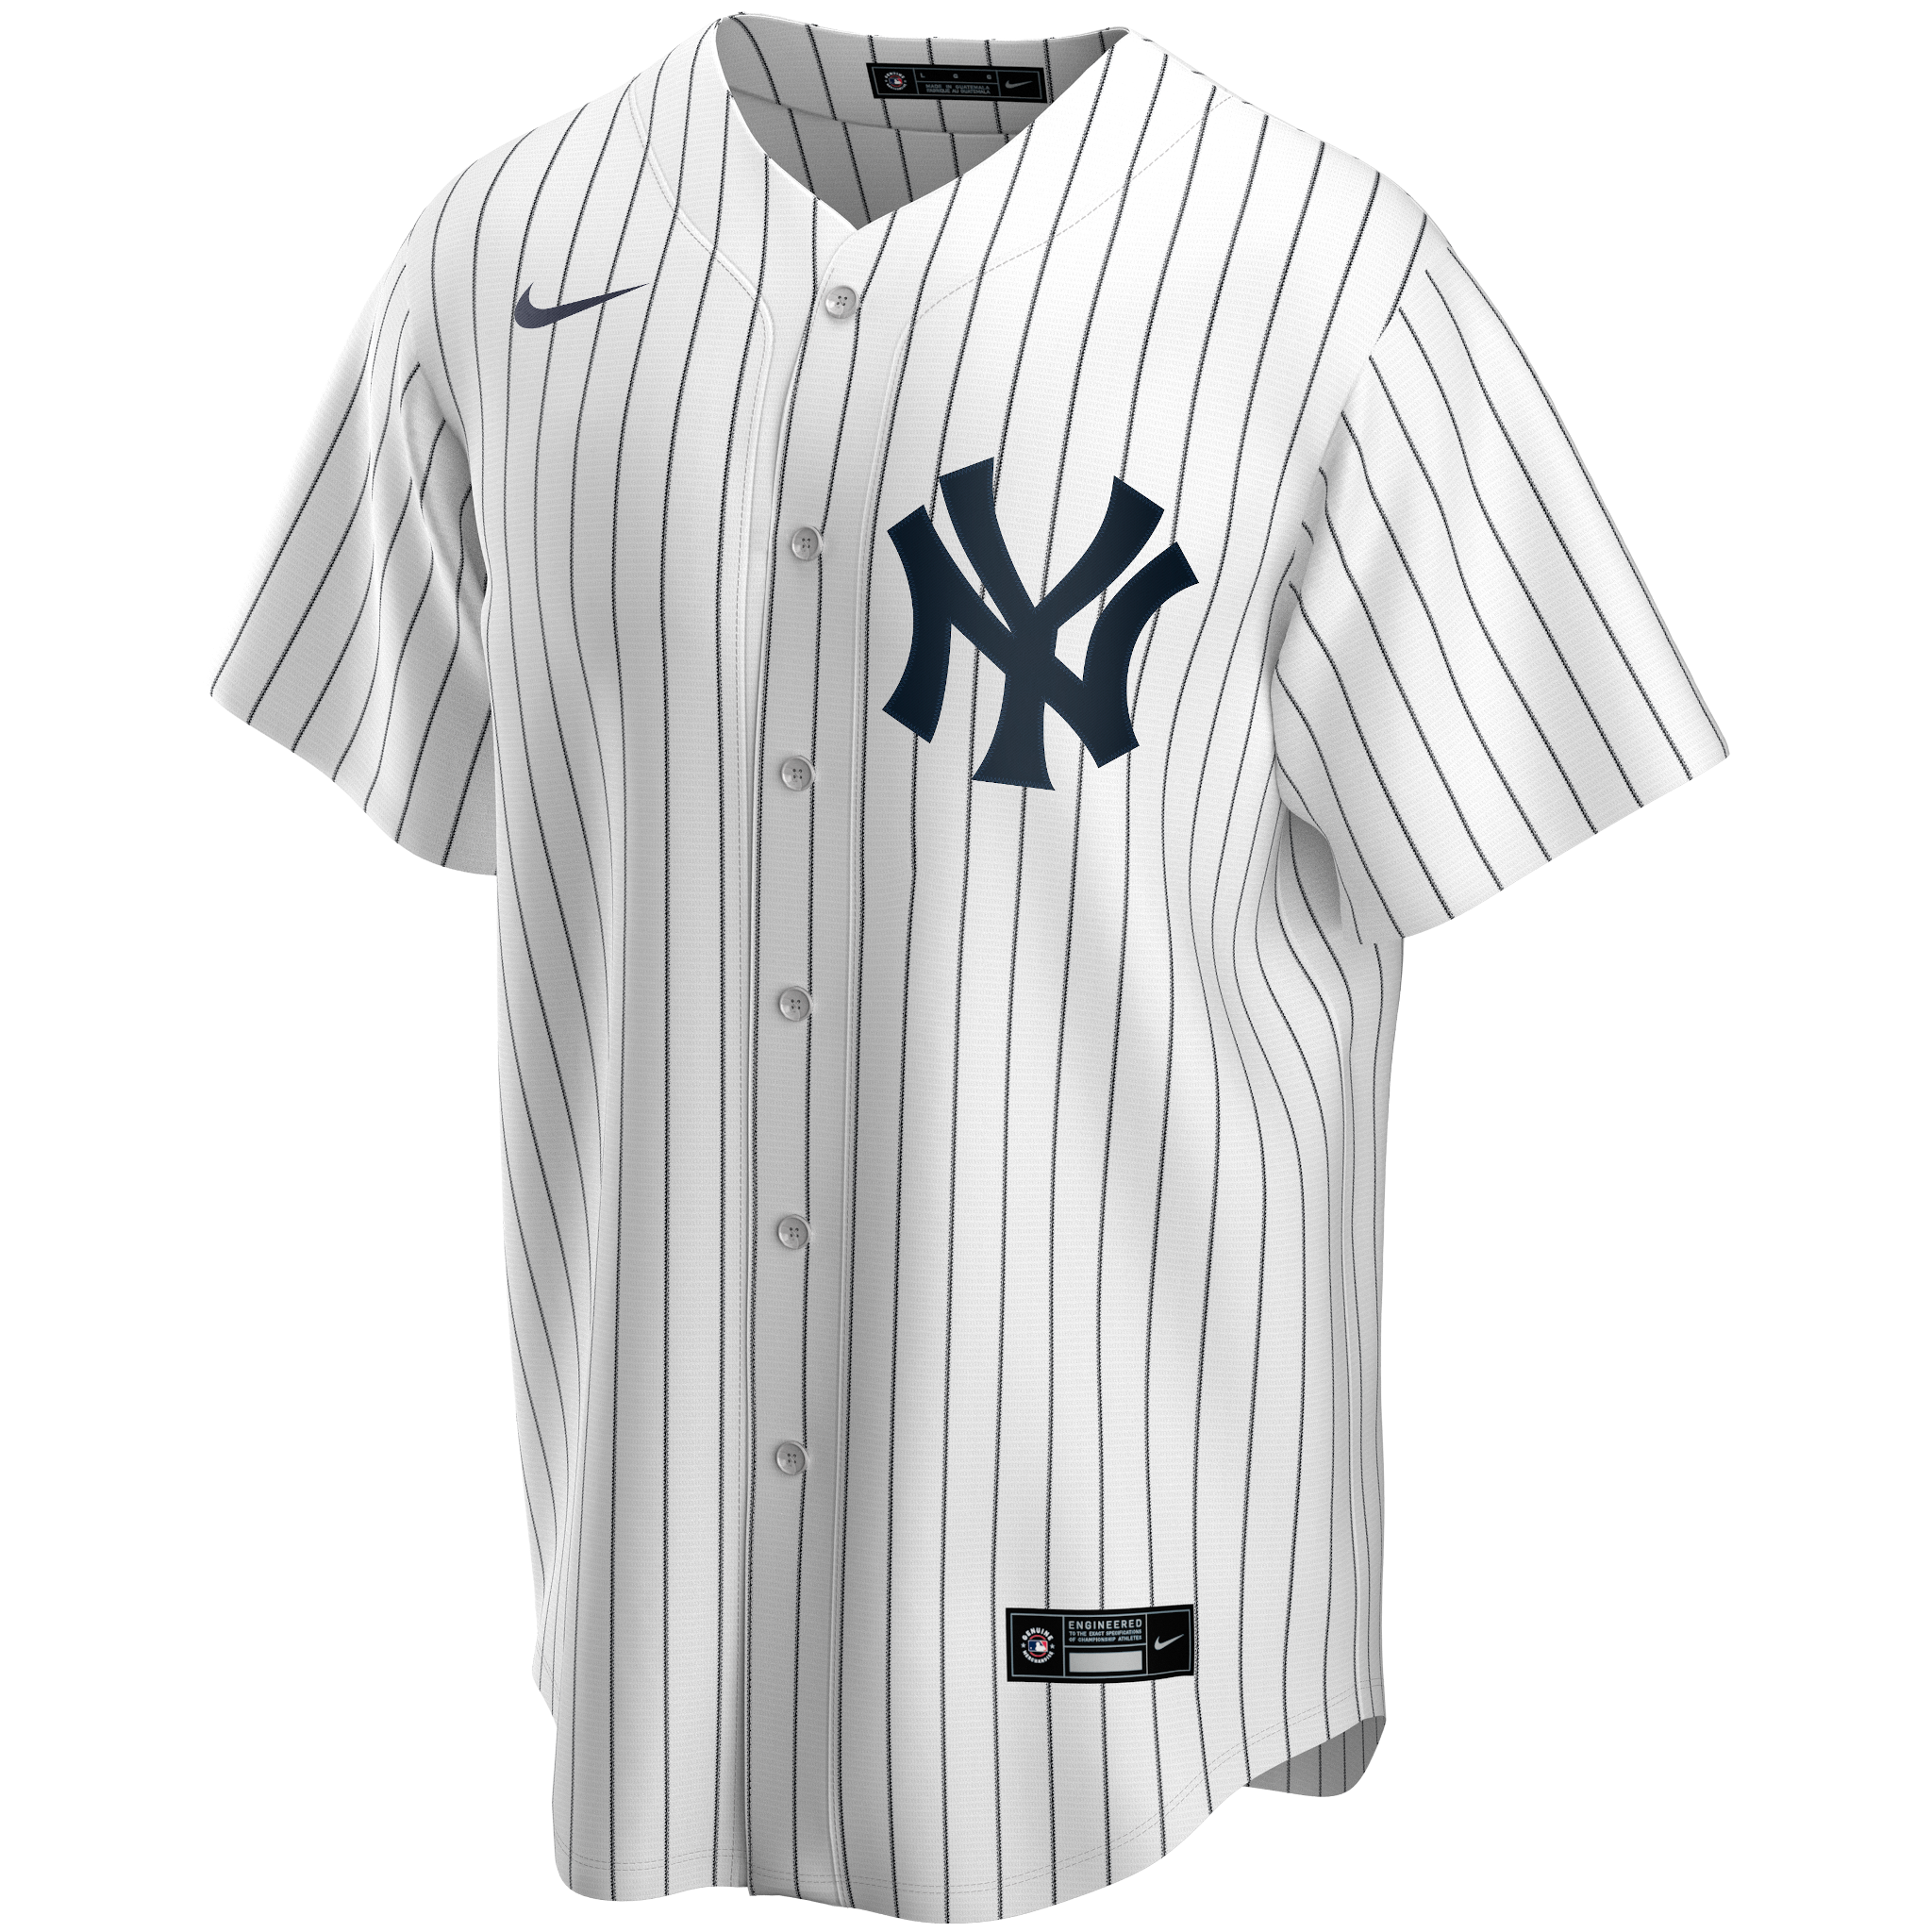 Home Youth Yankees Custom Jerseys With Numbers Only